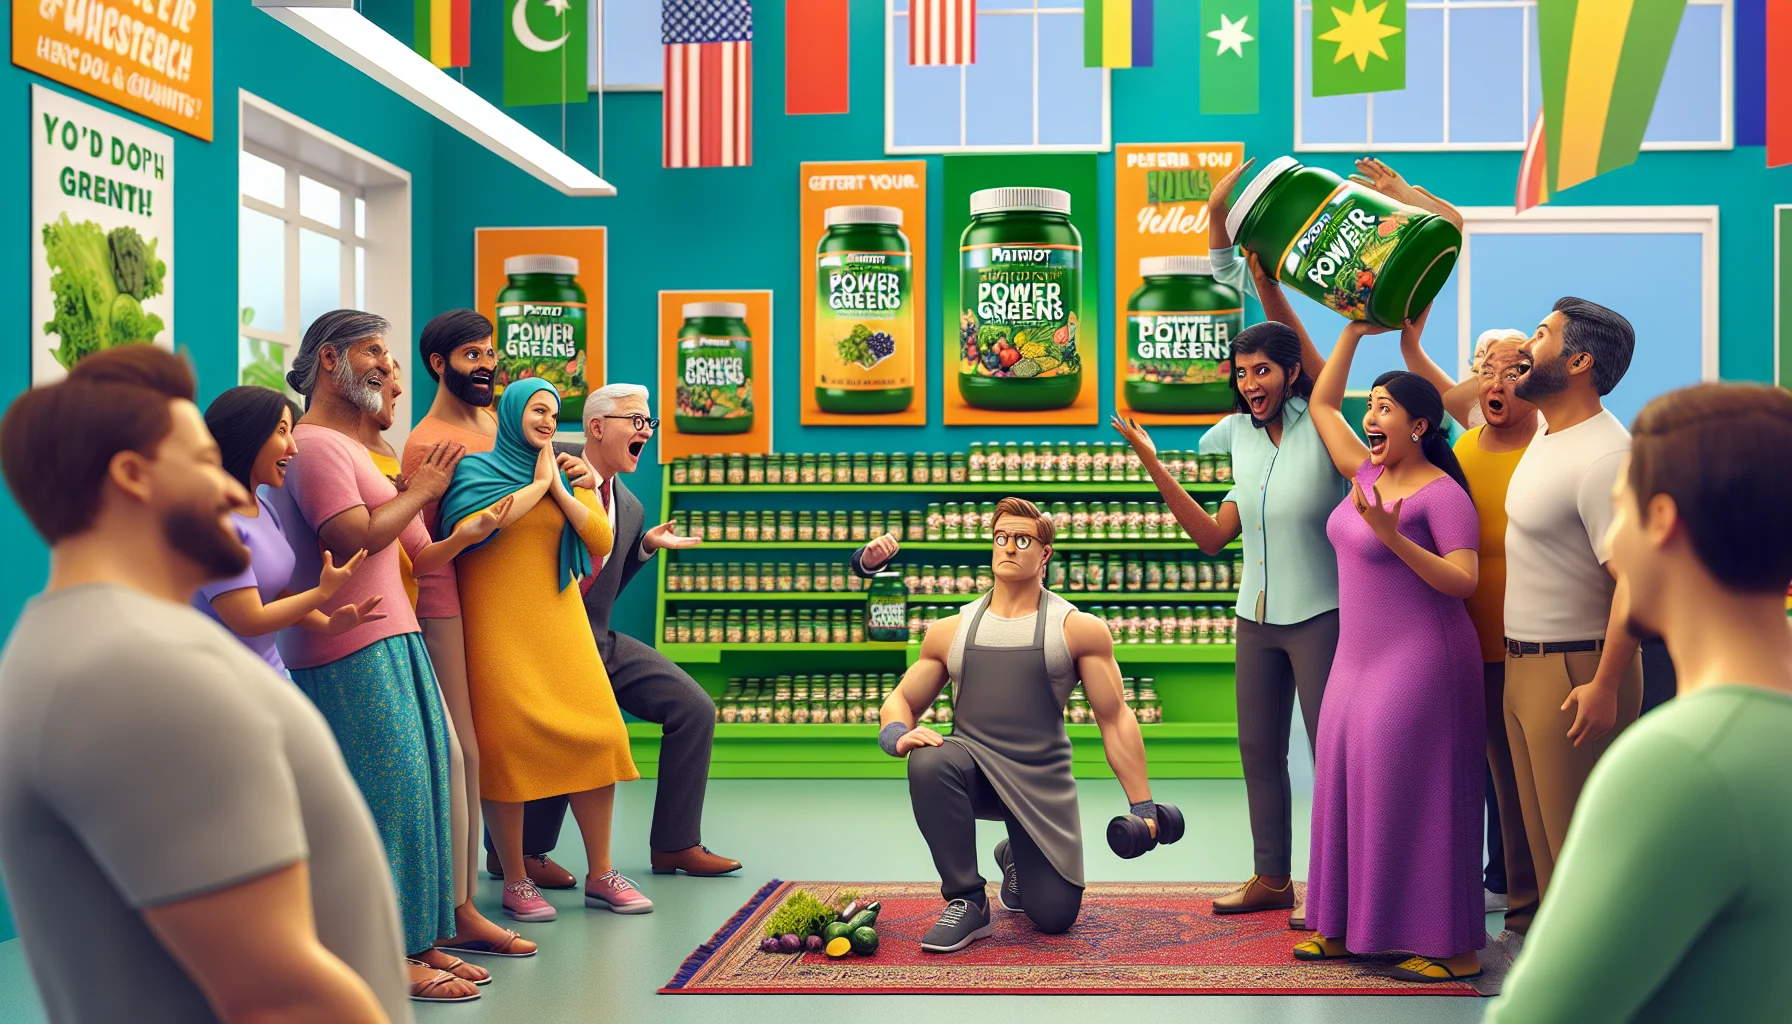 Generate a humorous and realistic scene set in a bright, colorful health store. Around the store, there are posters promoting the benefits of Patriot Power Greens for optimal health. On one side of the store, a Caucasian male employee is balancing power green jars on his head, presenting a facial expression of concentration. A crowd of amused customers of diverse descents and genders are watching him. On the other side, a South Asian female customer is lifting a jar of power greens as if it's a dumbbell, her expression full of determination and joy. Her friend, a Middle-Eastern male, is laughing and pointing at her while selecting a jar from the shelf. The environment encourages visitors to take up physical fitness activities in a light-hearted manner.